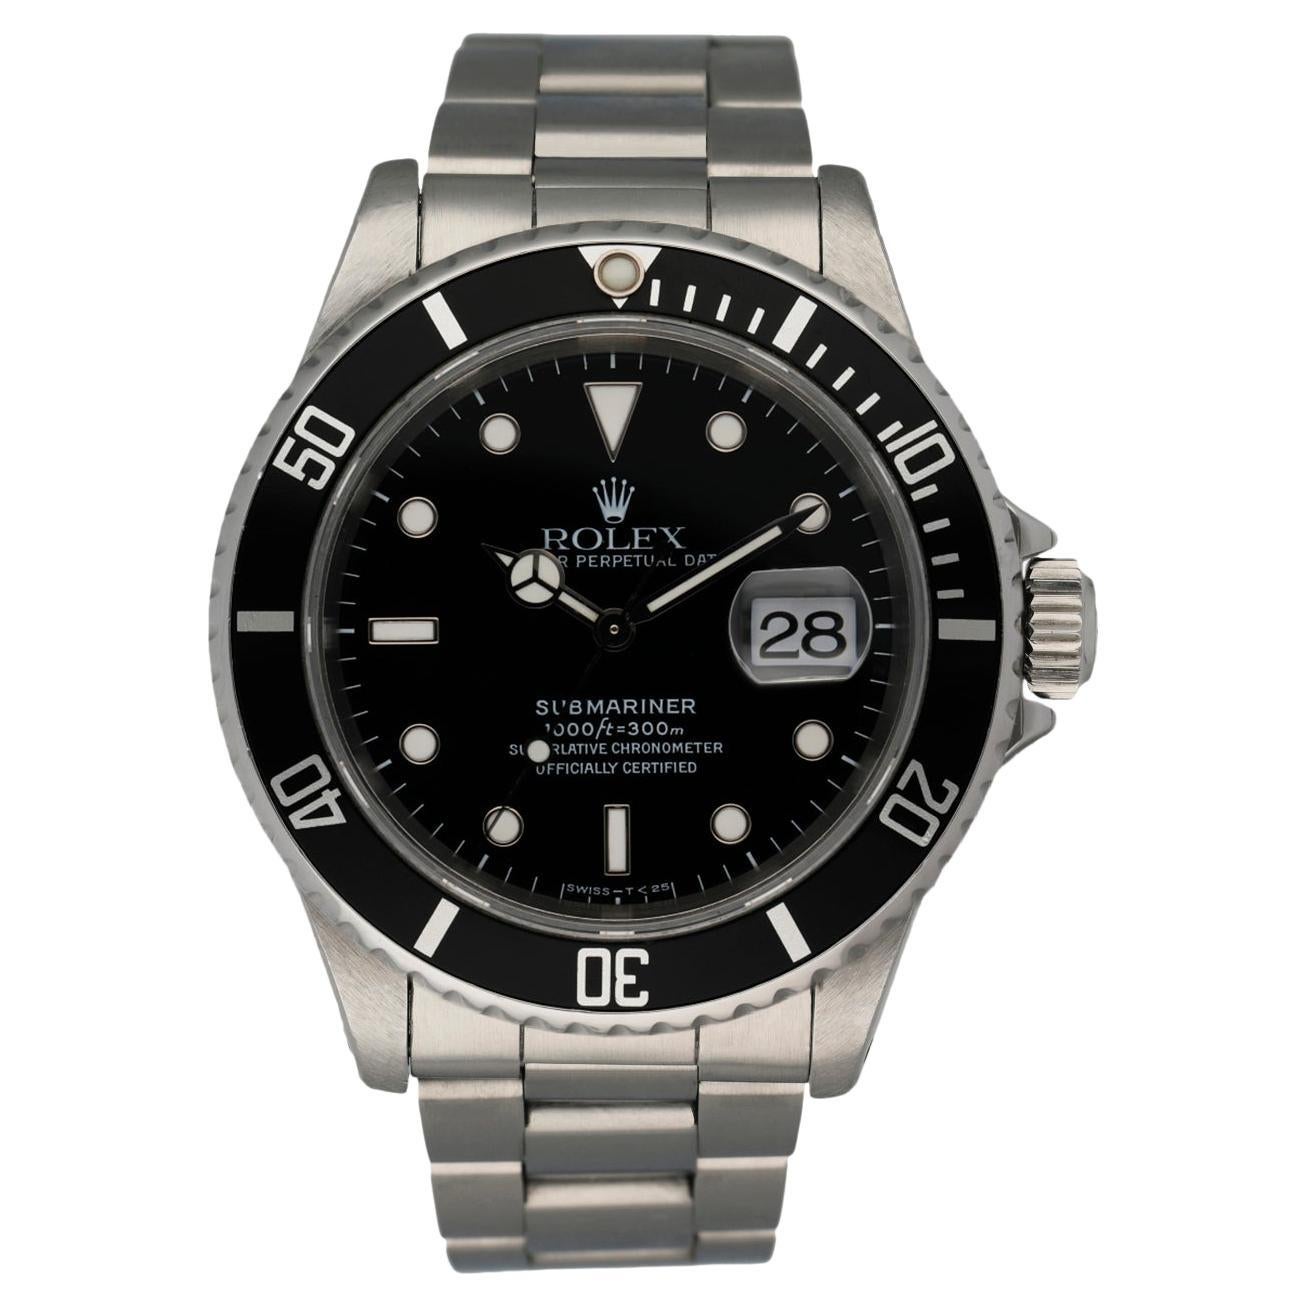 Rolex Oyster Perpetual Submariner Date 16610 Men's Watch